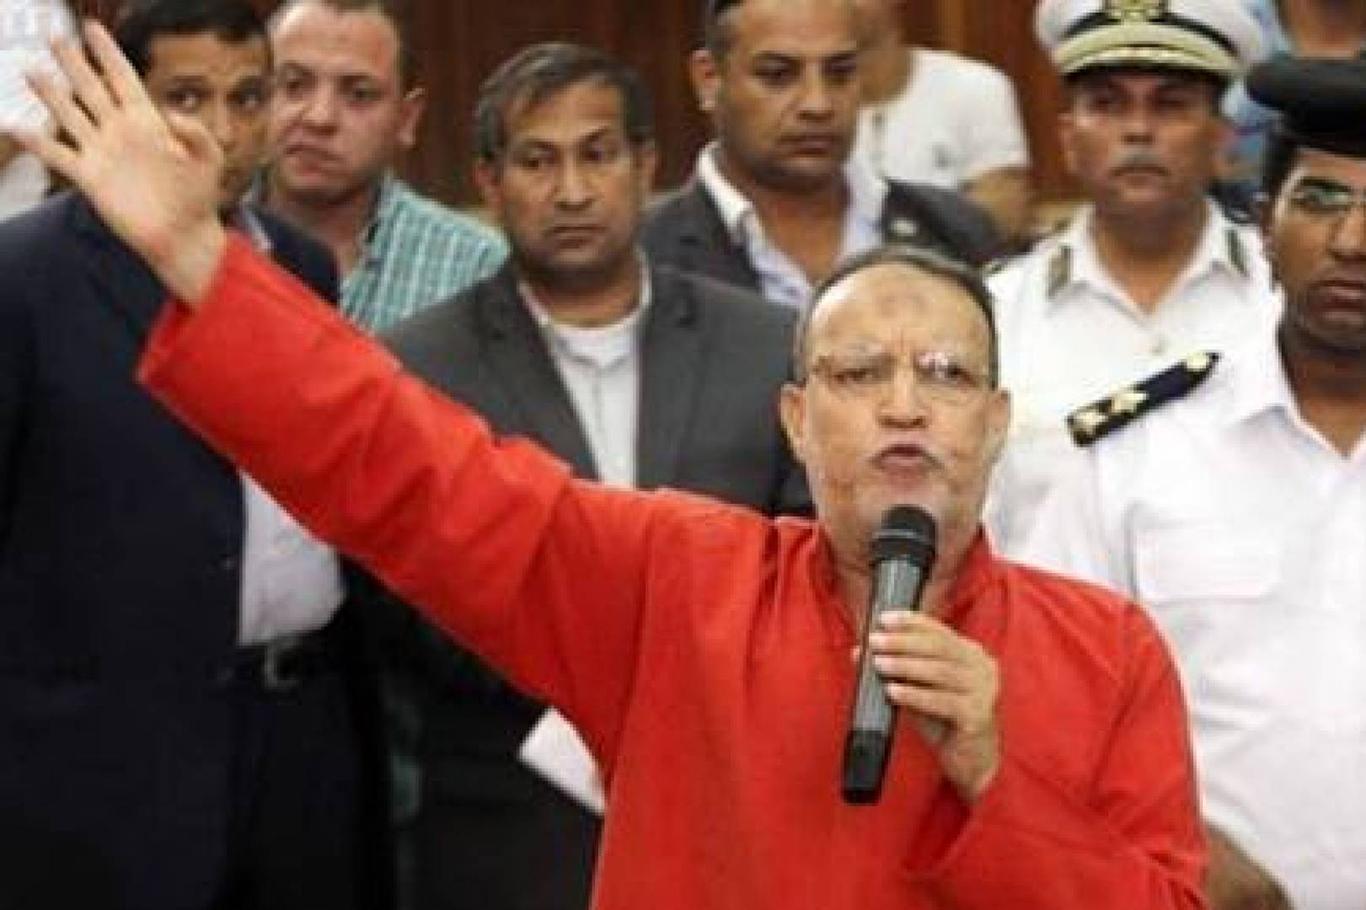 A prominent Muslim Brotherhood figure passes away in Egypt's prison